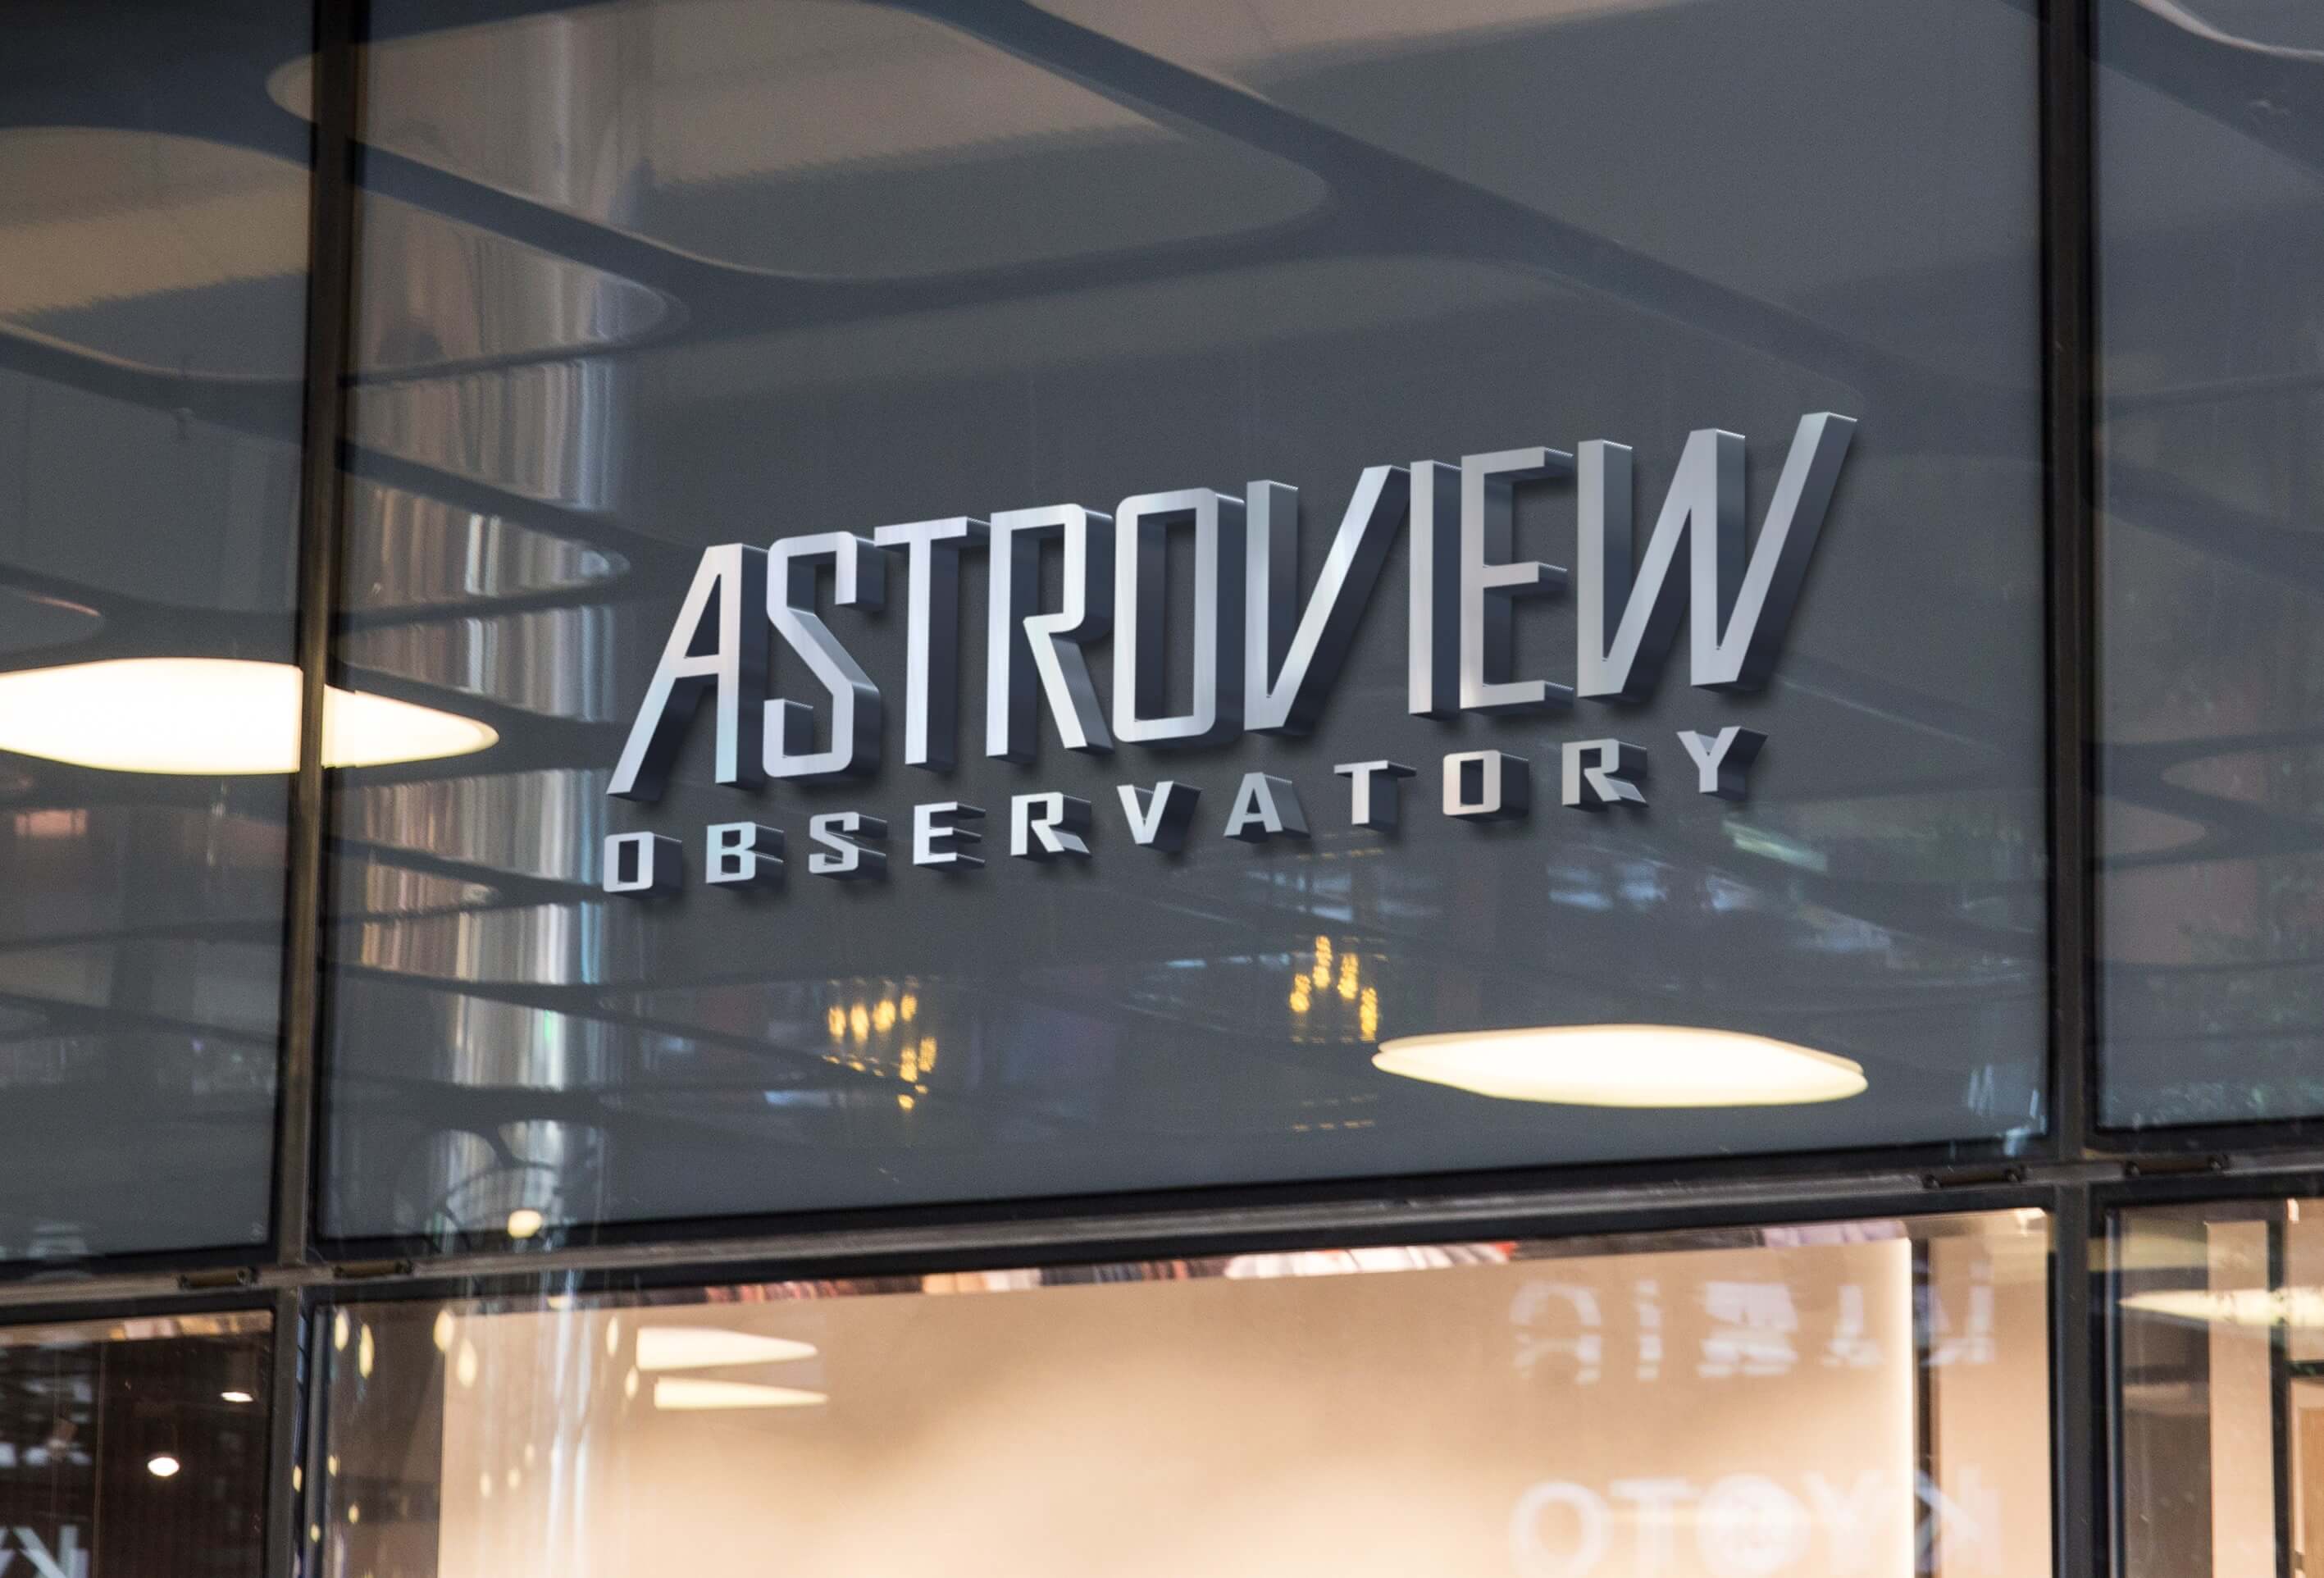 Astroview Sign